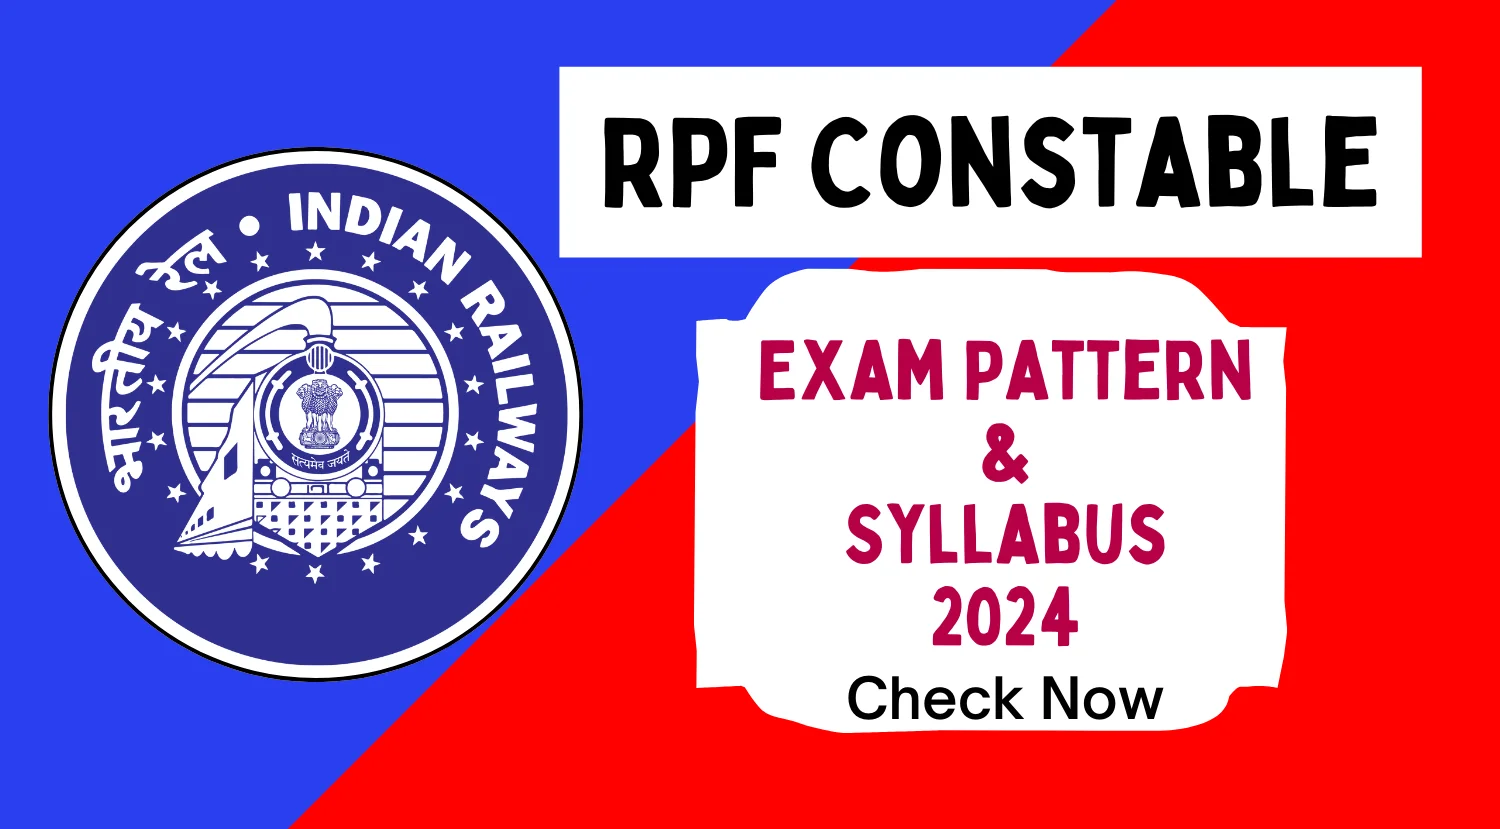 RPF Constable 2024 Exam Pattern and Syllabus